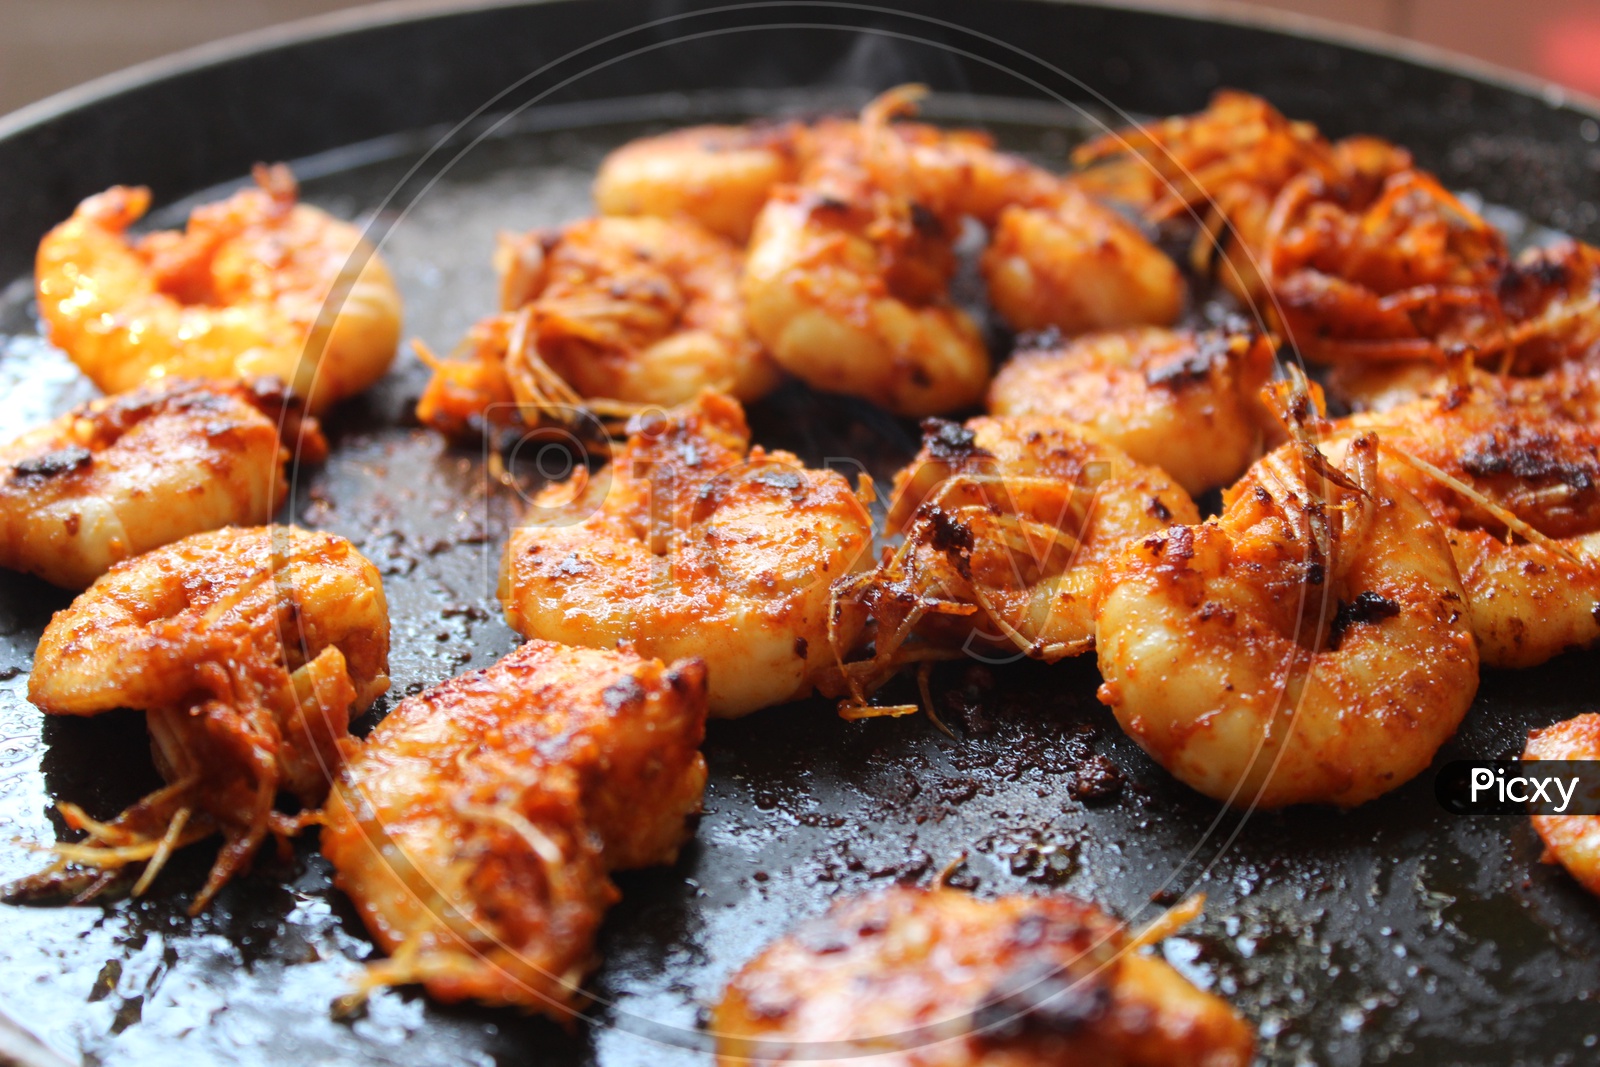 Prawns cooked on a non stick pan.